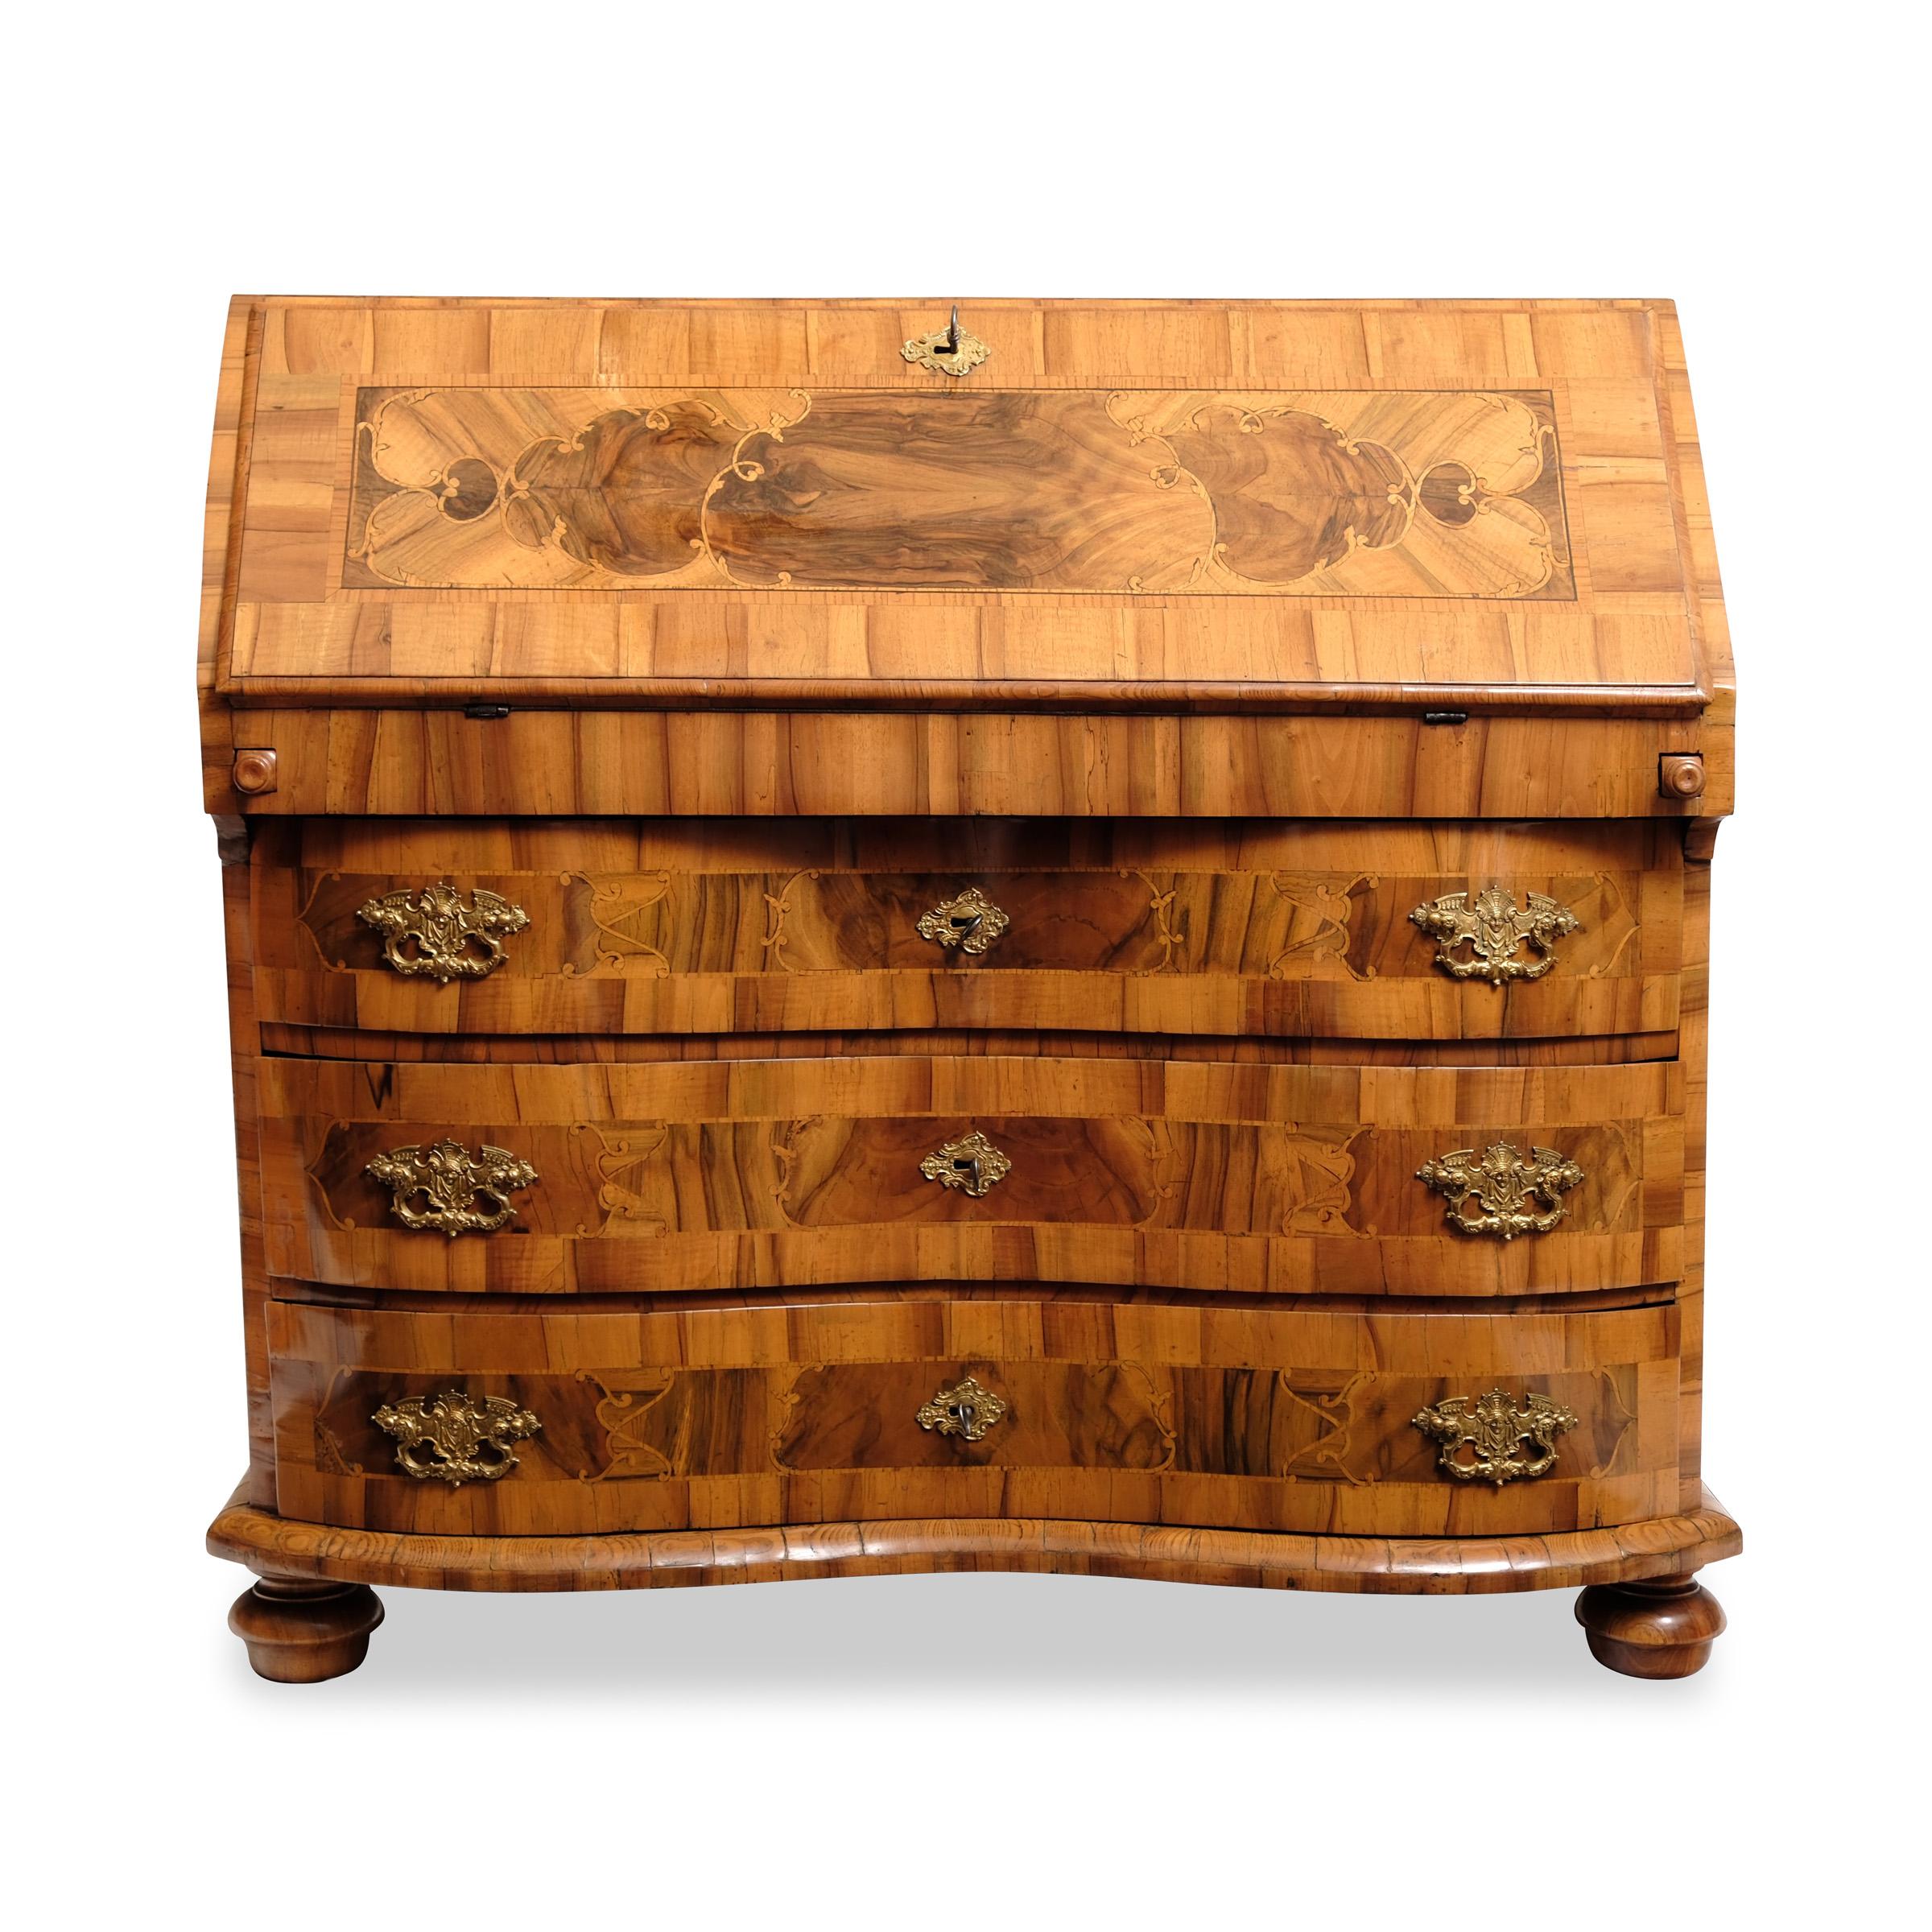 Sloping flap secretary

Baroque, Brunswick, around 1750,

walnut and walnut root wood, plum and maple veneered on softwood corpus, 3 drawers, double curved corpus on ball feet, slanted flap and front drawers with bandelwerk decoration, writing